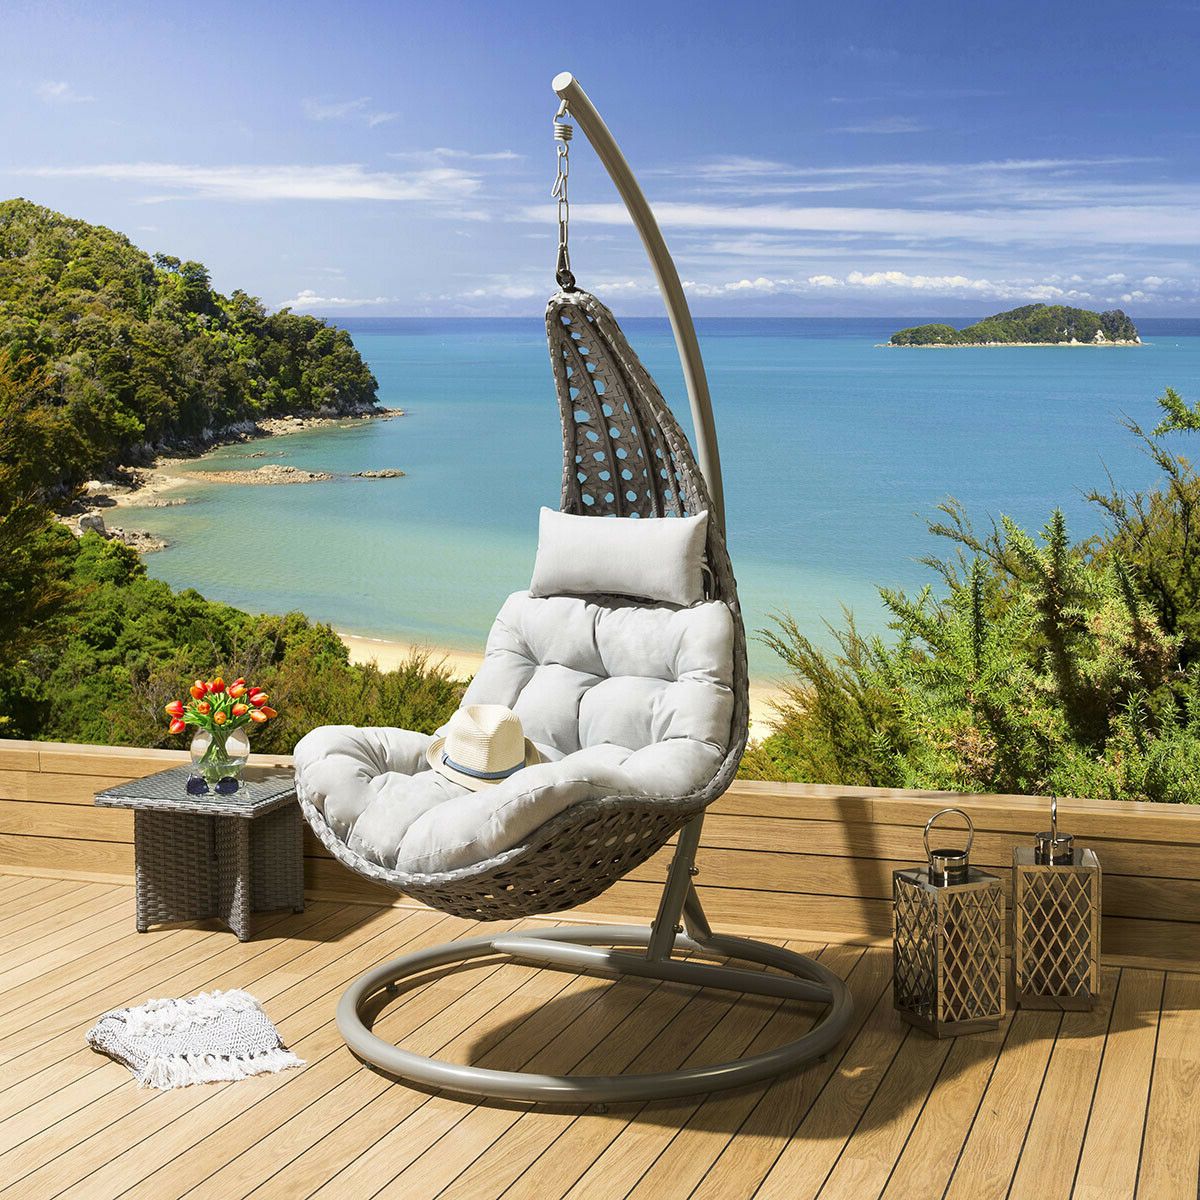 Preferred Rattan Garden Swing Chairs With Regard To Luxury Outdoor Modern Garden Hanging Swing Chair Grey Rattan Cover Inc (Photo 31 of 31)